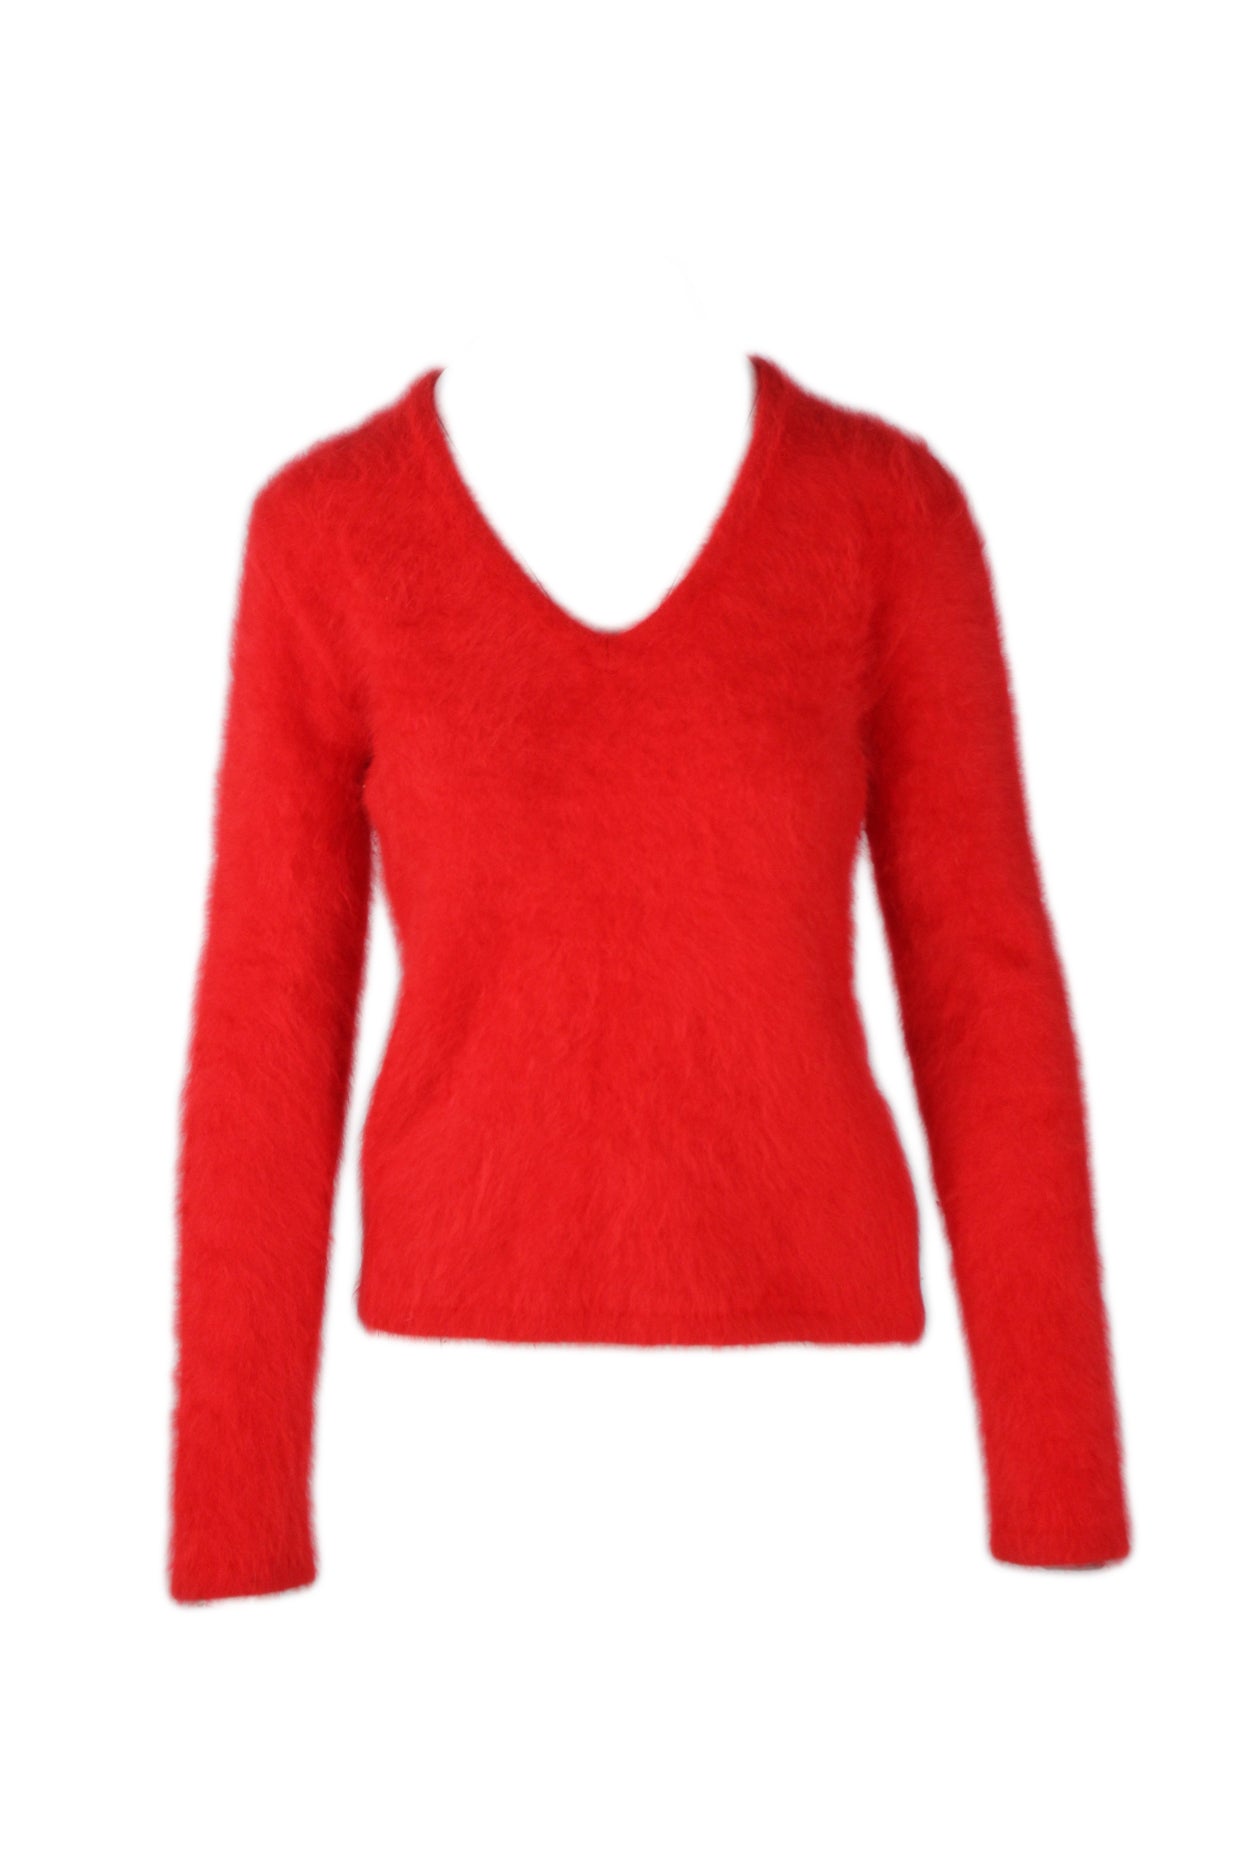 front angle of vintage belldini bright red angora sweater. features ribbed cuffs/hem/v-neck, long sleeves, pull-over fit, and all over fuzzy knit body. 